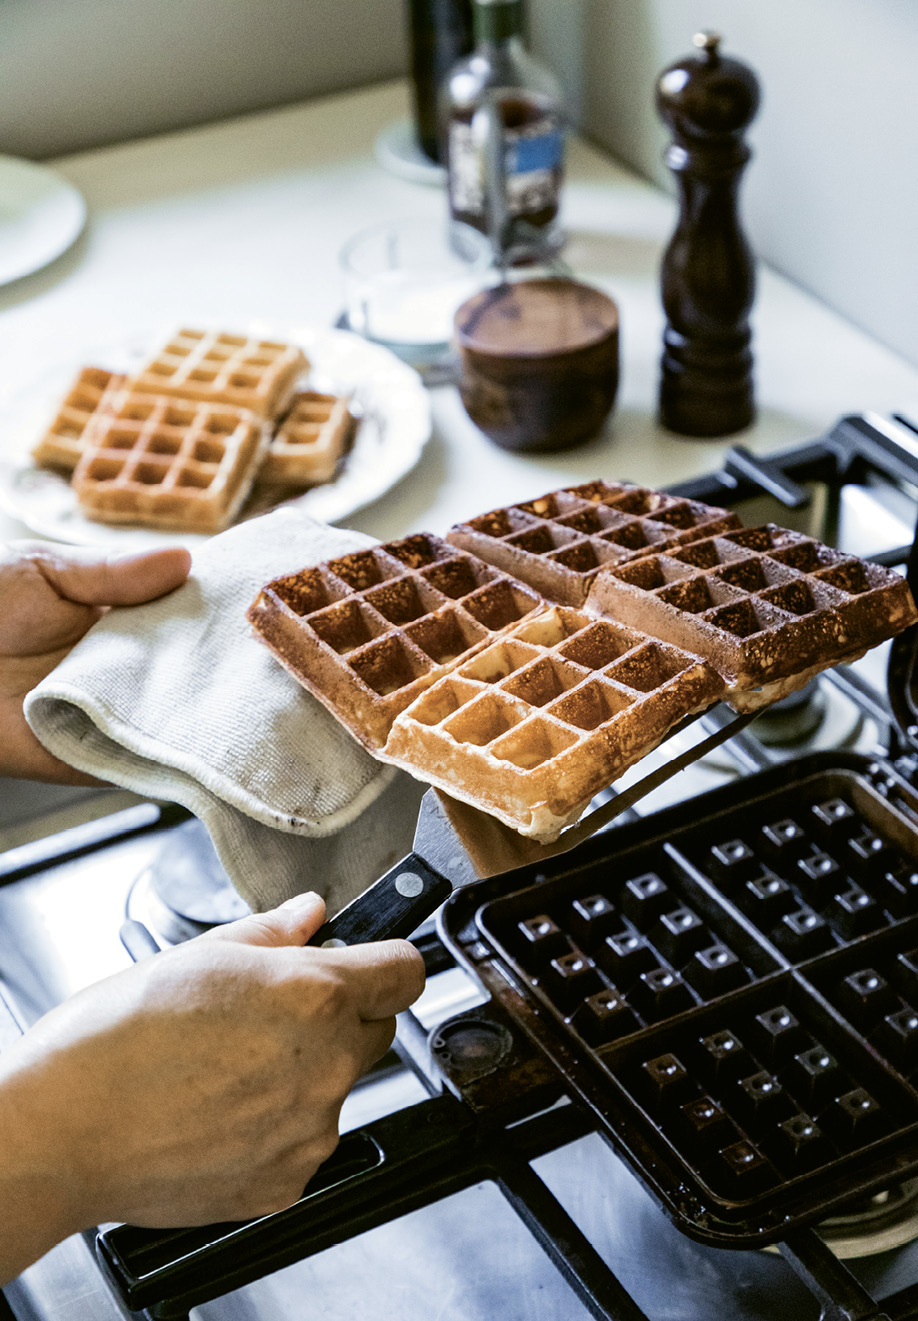 “I use a vintage-ish Nordicware cast iron waffle iron I got on eBay. It’s one of my favorite pieces of cookware,” says Wong. “I love crumble. I try to put it on everything.”